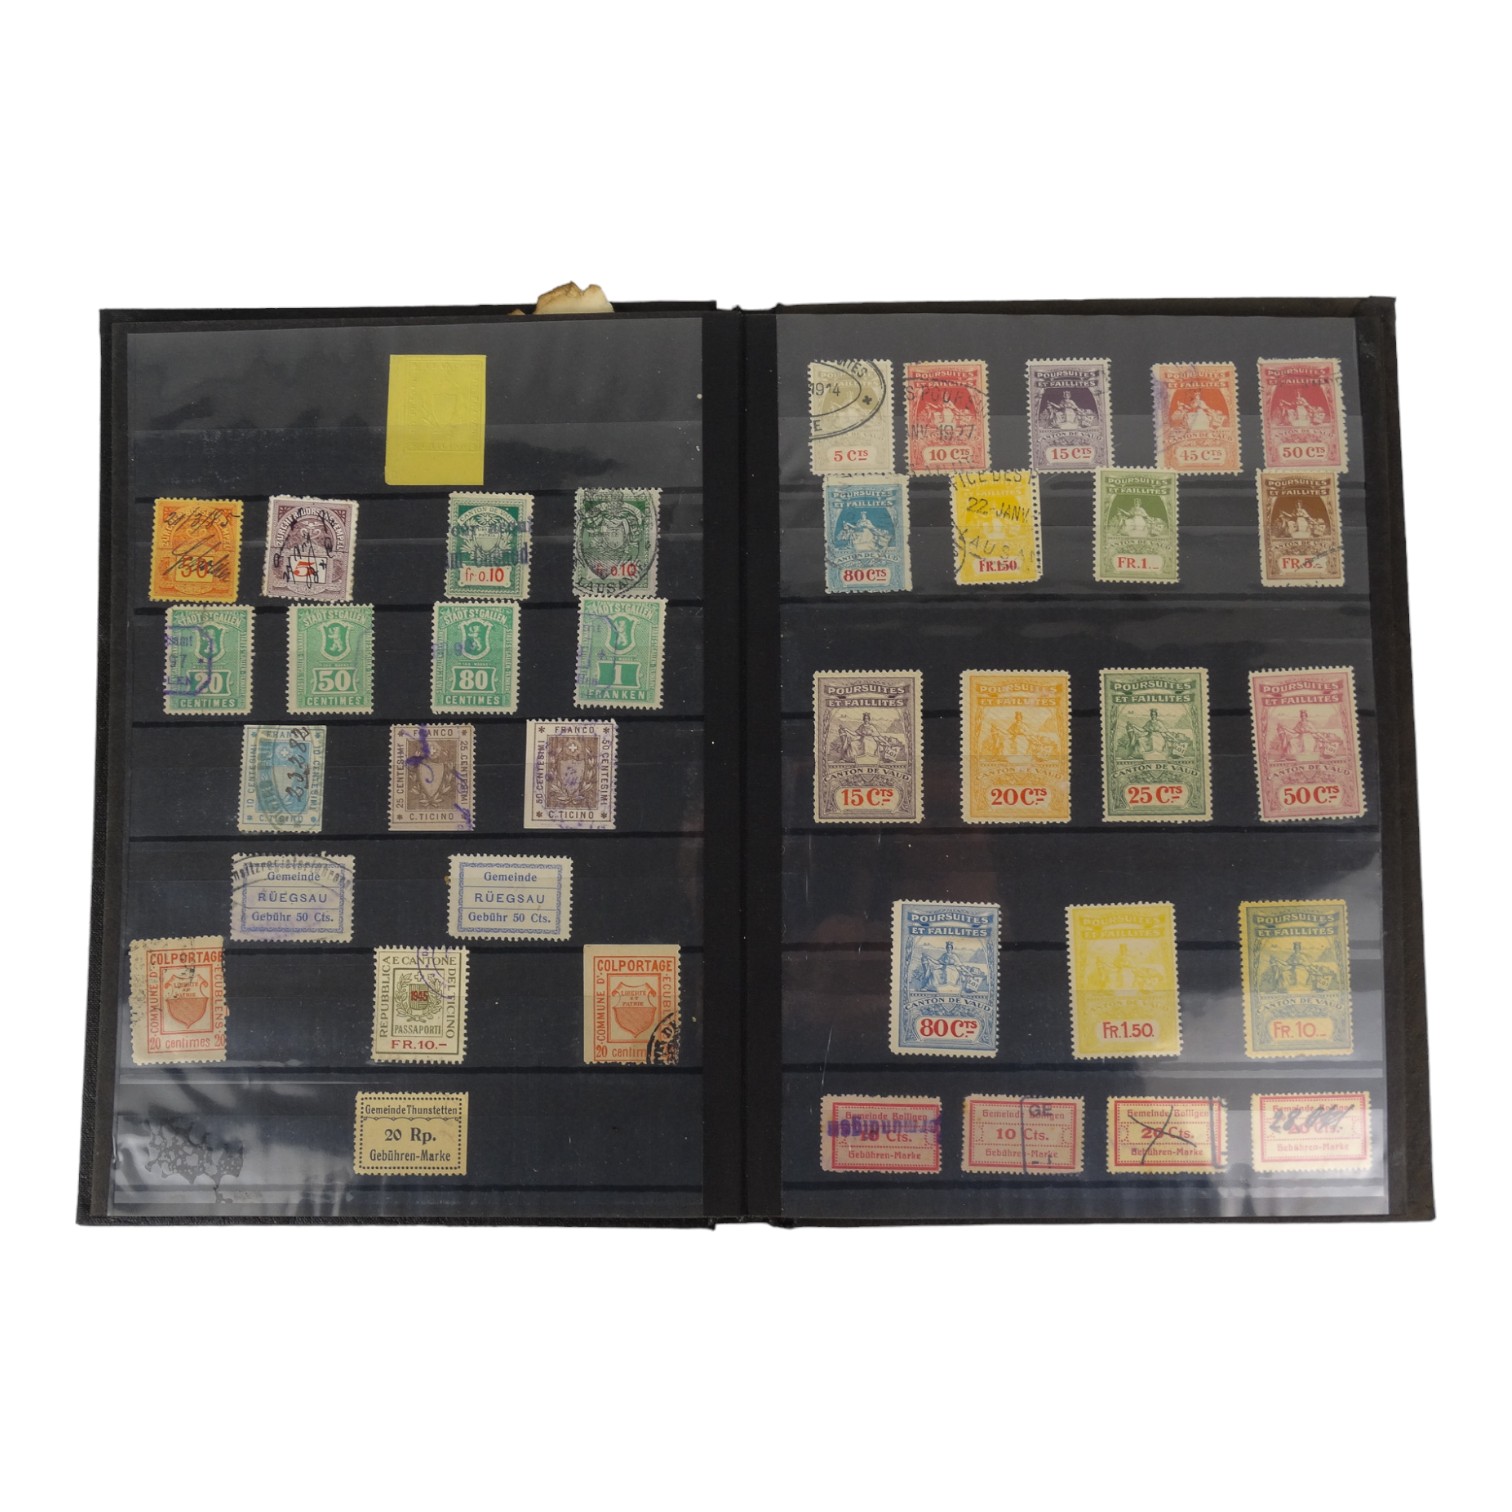 WORLD CINDERELLA STAMPS INCLUDING REVENUES - An interesting Lot contained in a stock book, stock - Image 5 of 6